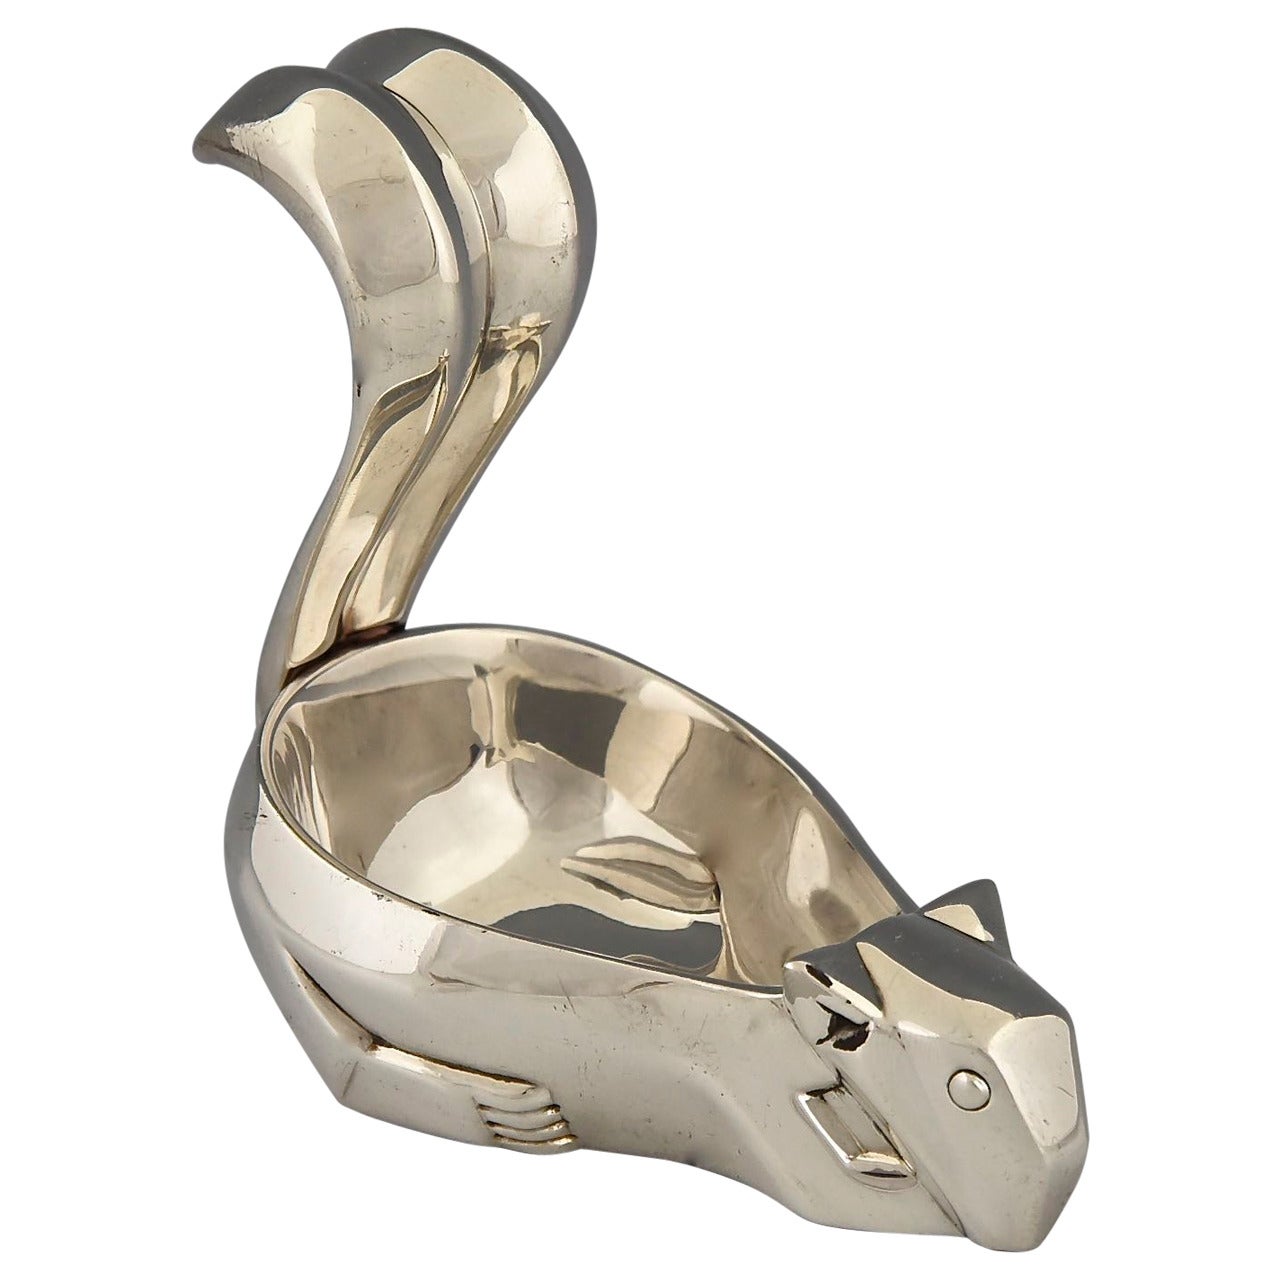 Art Deco Squirrel Tray Designed by A. De Ribes for Christofle, Silver Plated